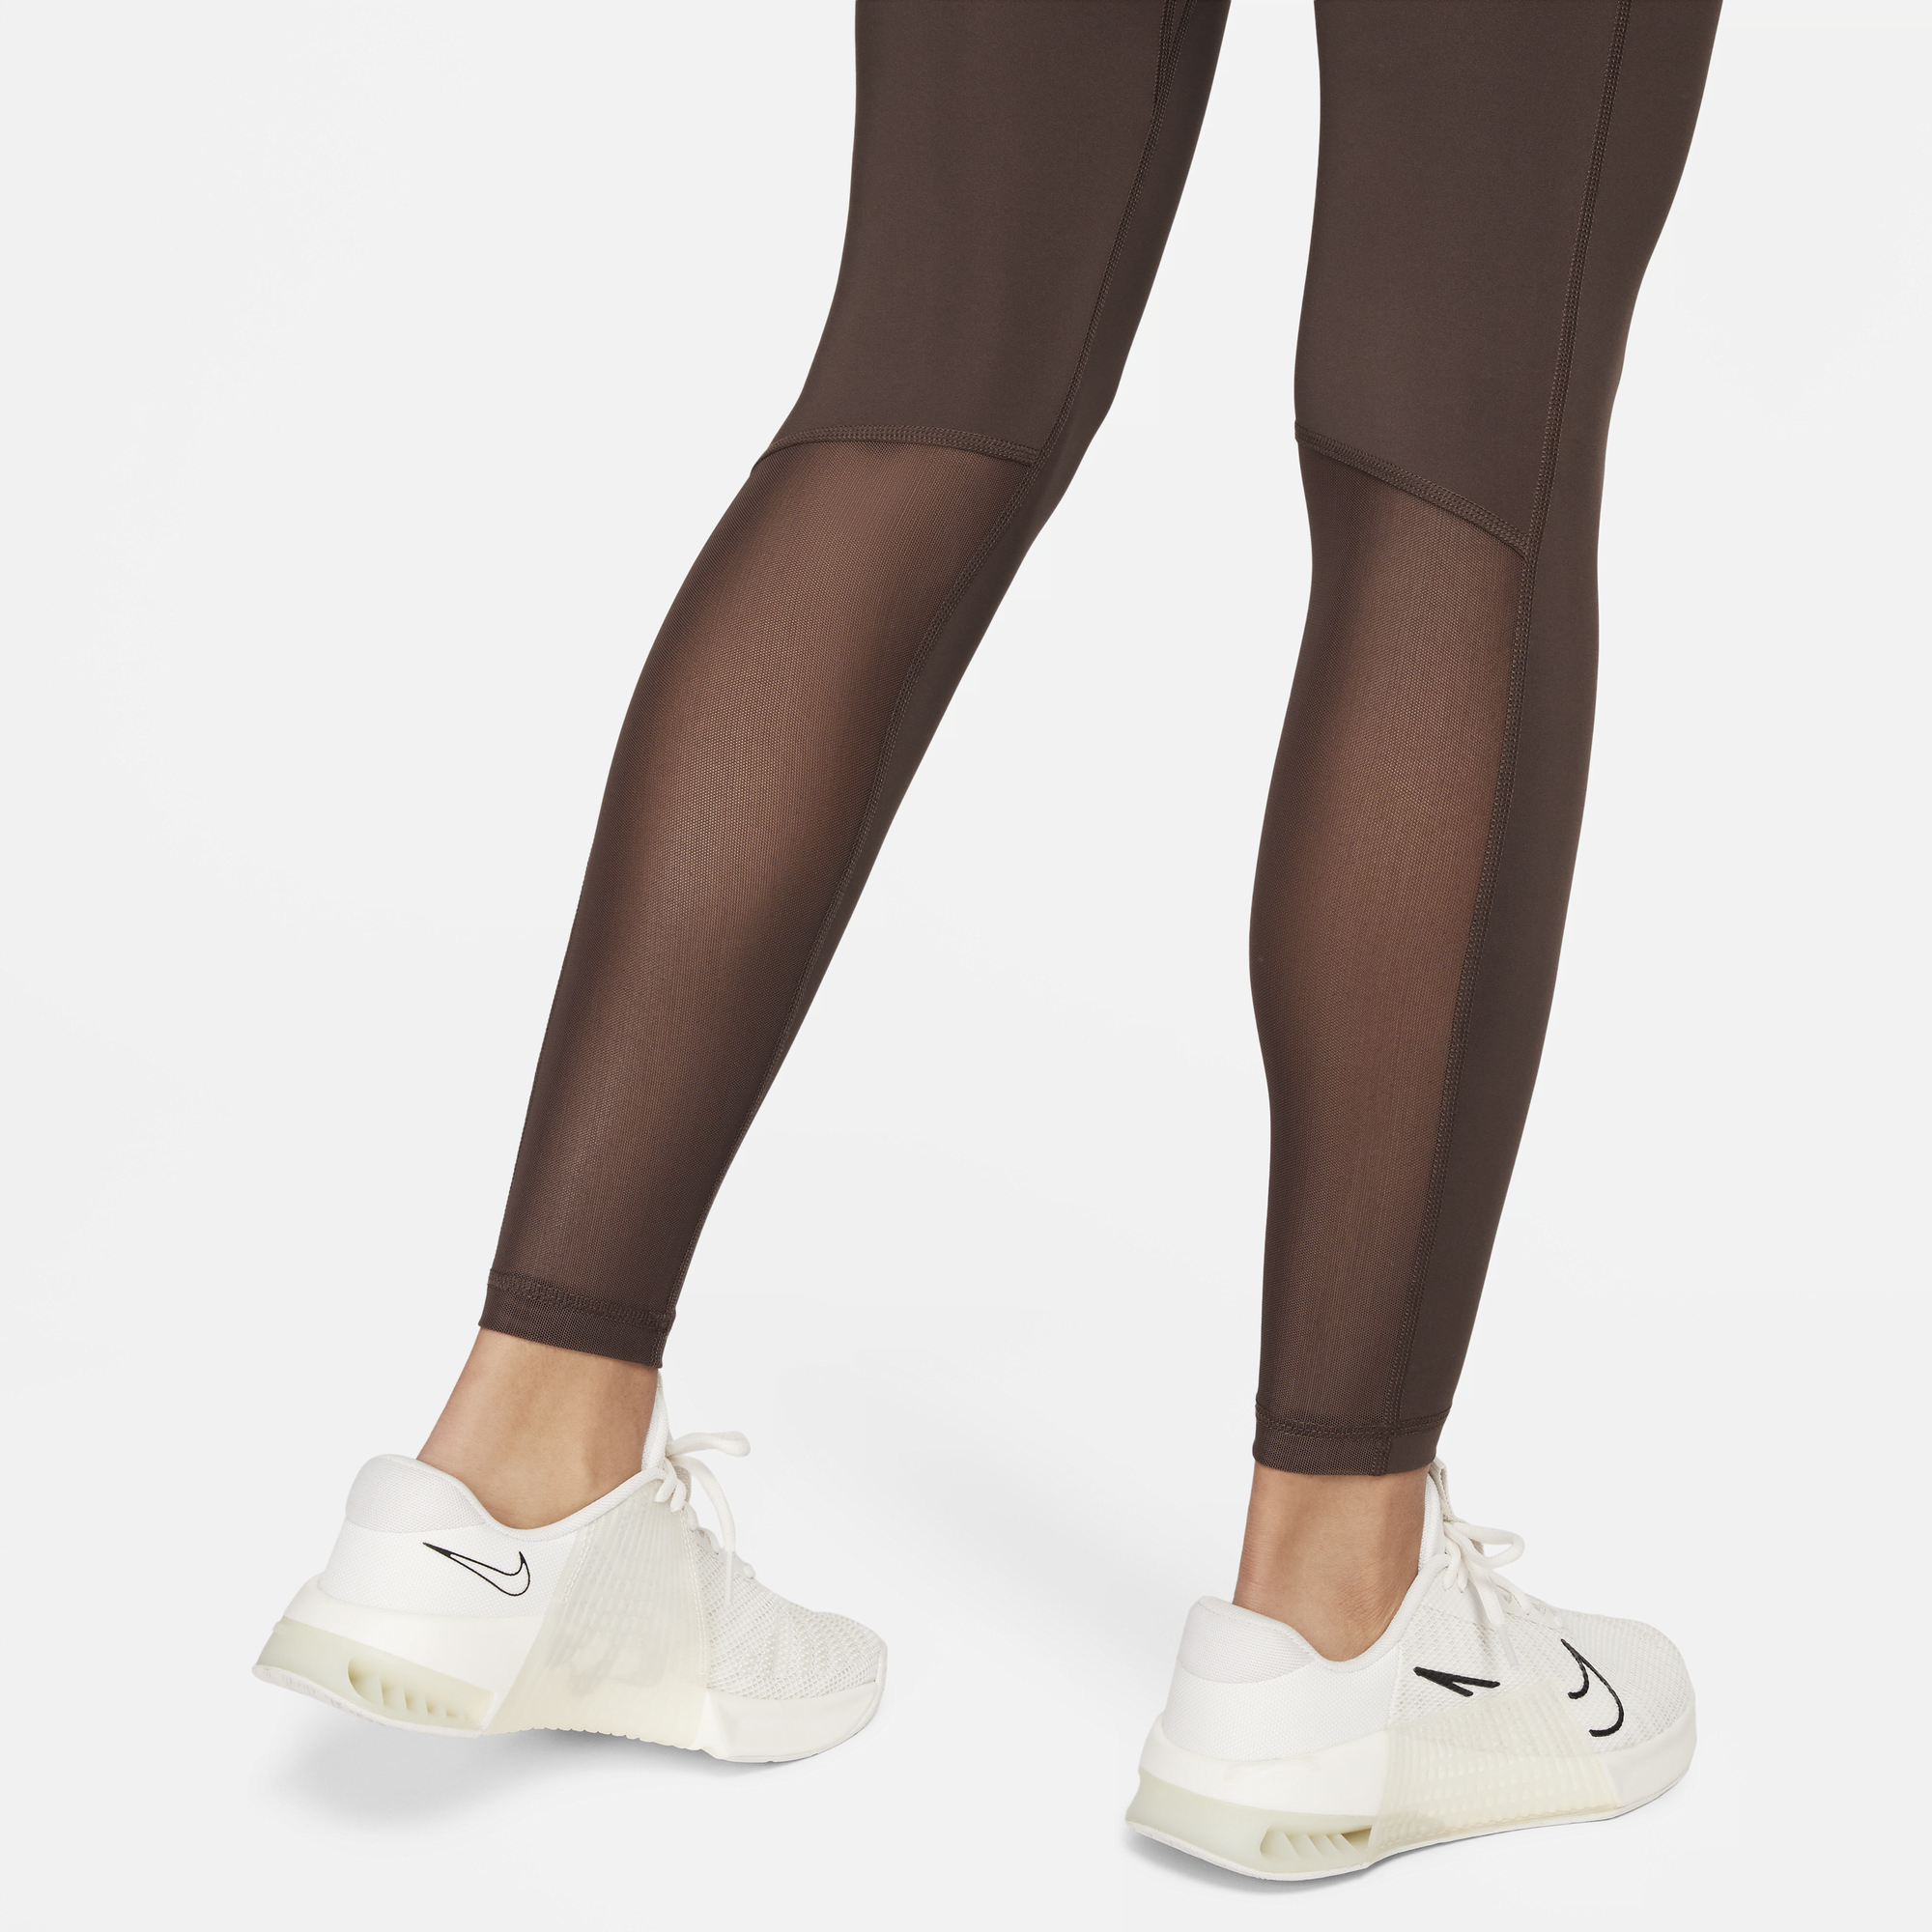 Nike Pro 365 Leggings Obsidian Navy / White The Nike Pro Leggings are made  with sweat-wicking fabric that and mesh across the calves to keep you cool  and dry. Soft, stretchy fabric